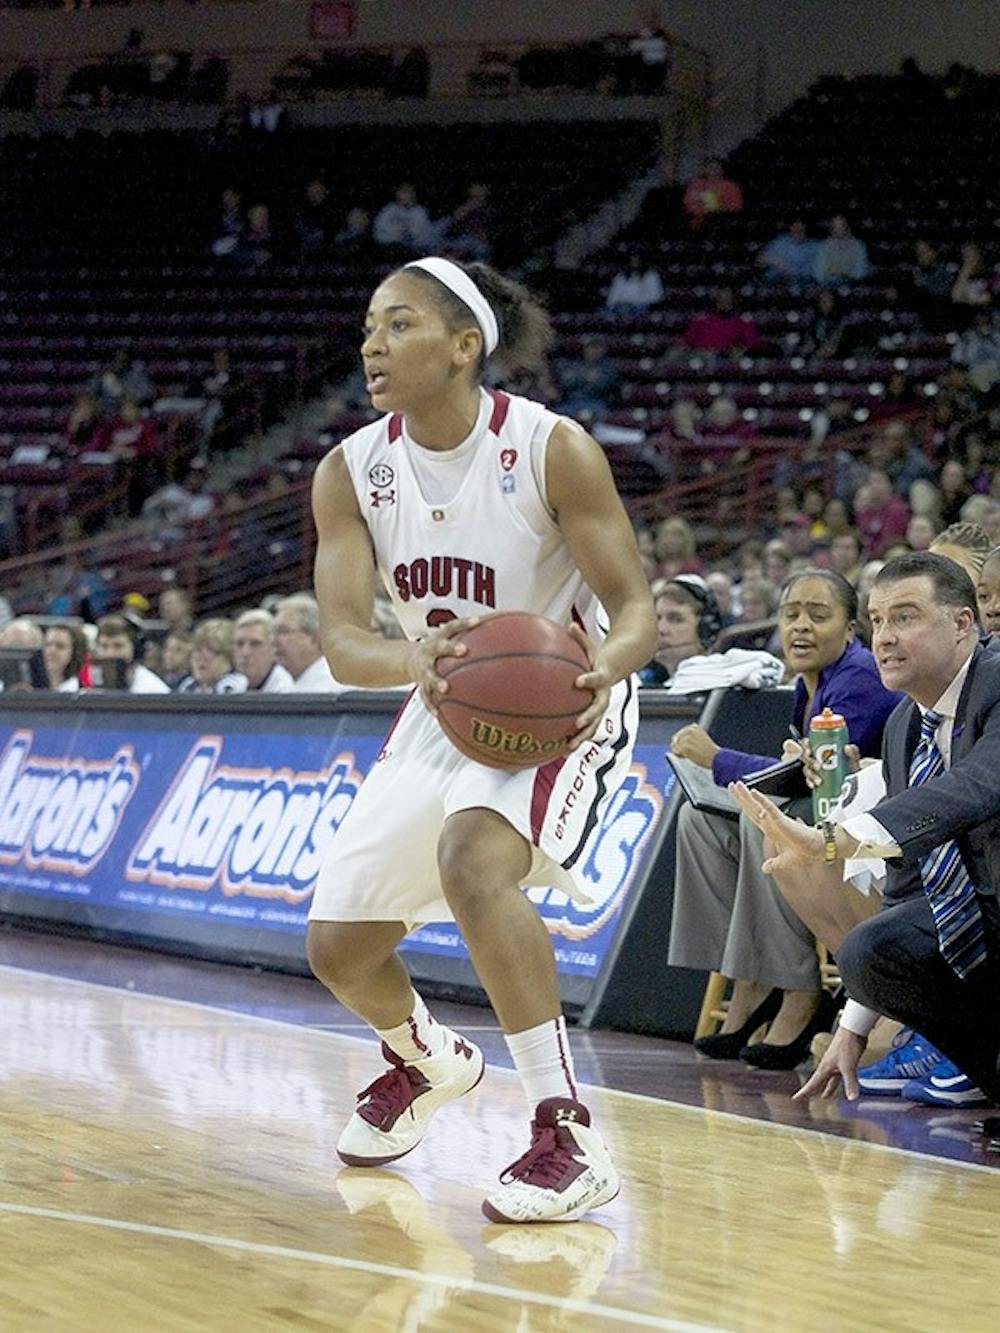 Senior guard Ieasia Walker said she knows not to overlook Alabama. A win tonight would give USC 20 on the season.